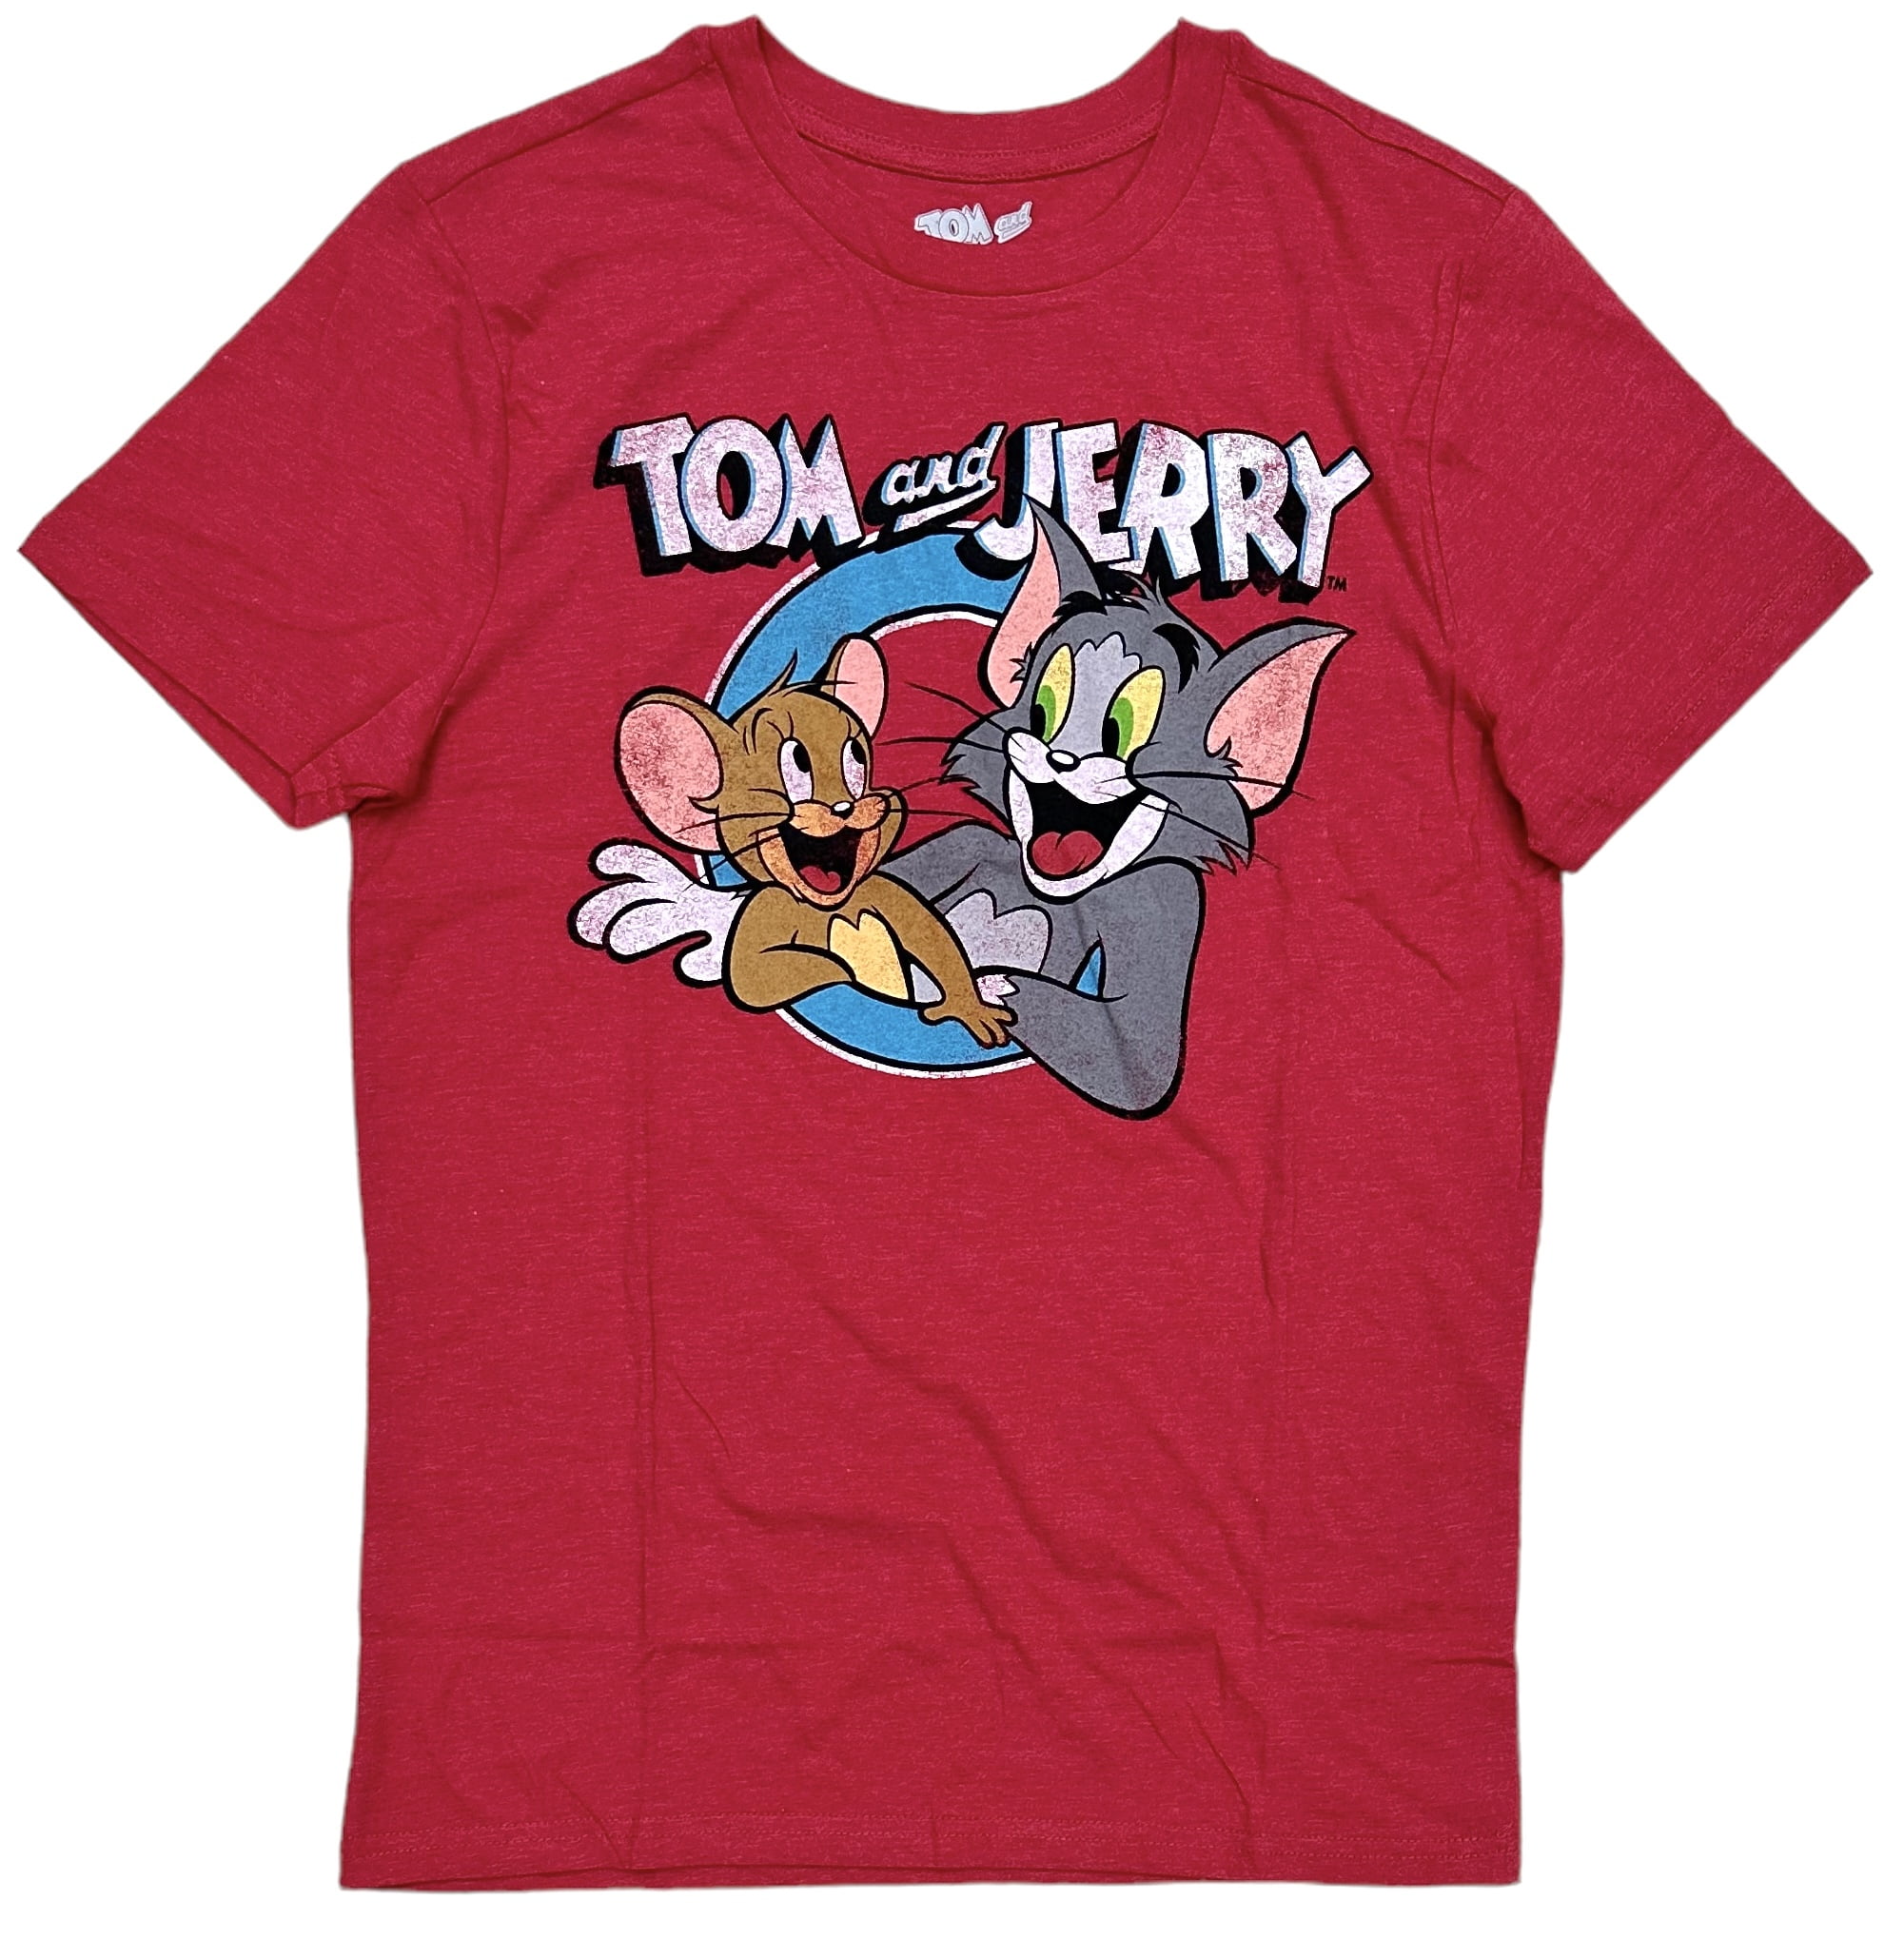 Tom and Jerry Men's Officially Licensed Distressed Graphic Print Tee T-Shirt  (XXX-Large, Red Heather)